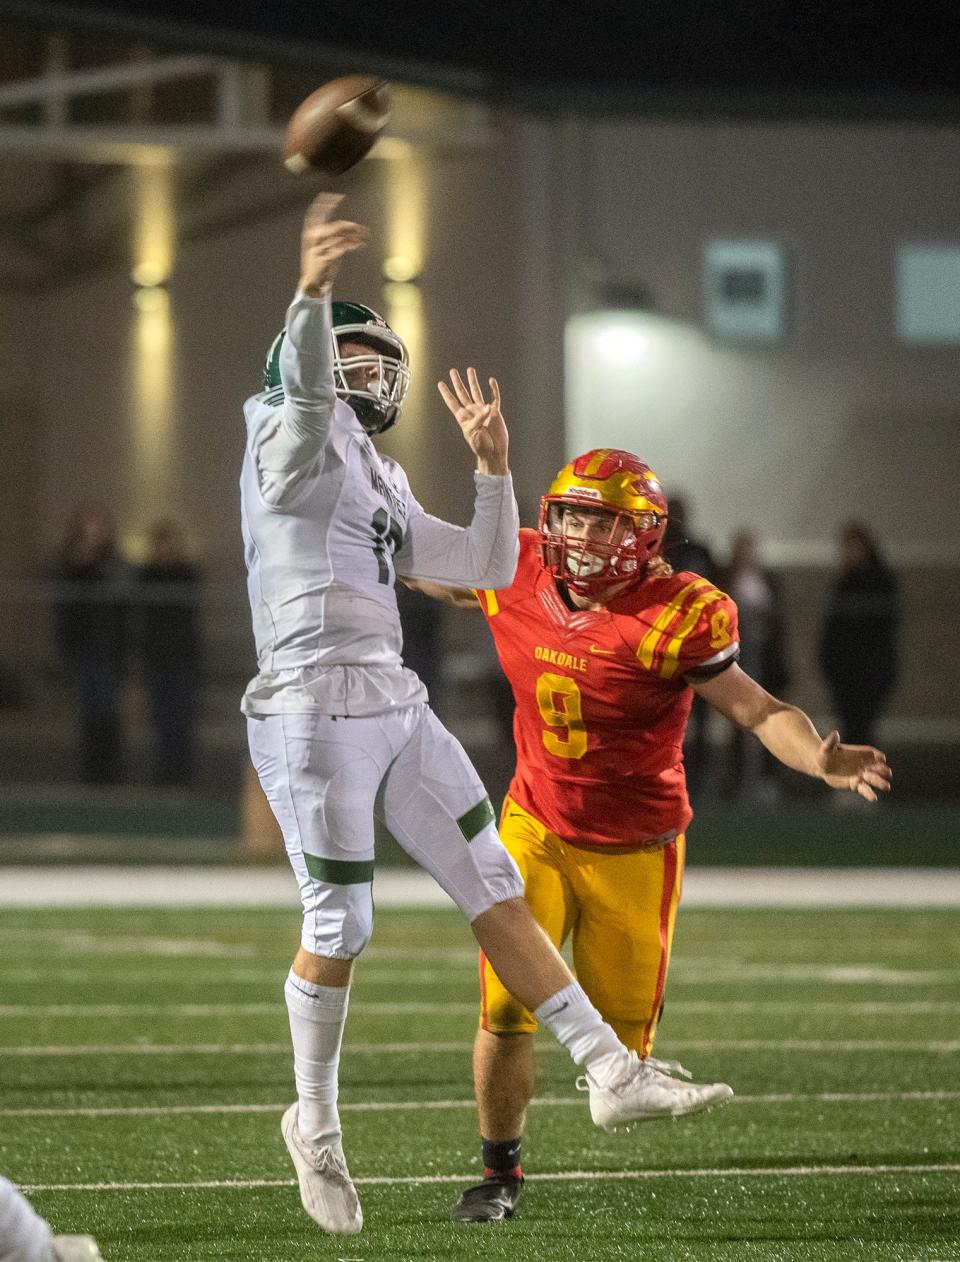 Manteca's Hudson Wyatt, left, throws a pass under pressure from Oakdale's Brock Osmondson during the Sac-Joaquin Section Division III championship game at St. Mary's High School in Stockton. Wyatt's teammate  Zion Allen caught the pass and ran in for the game-winning touchdown. Manteca won 35-28.